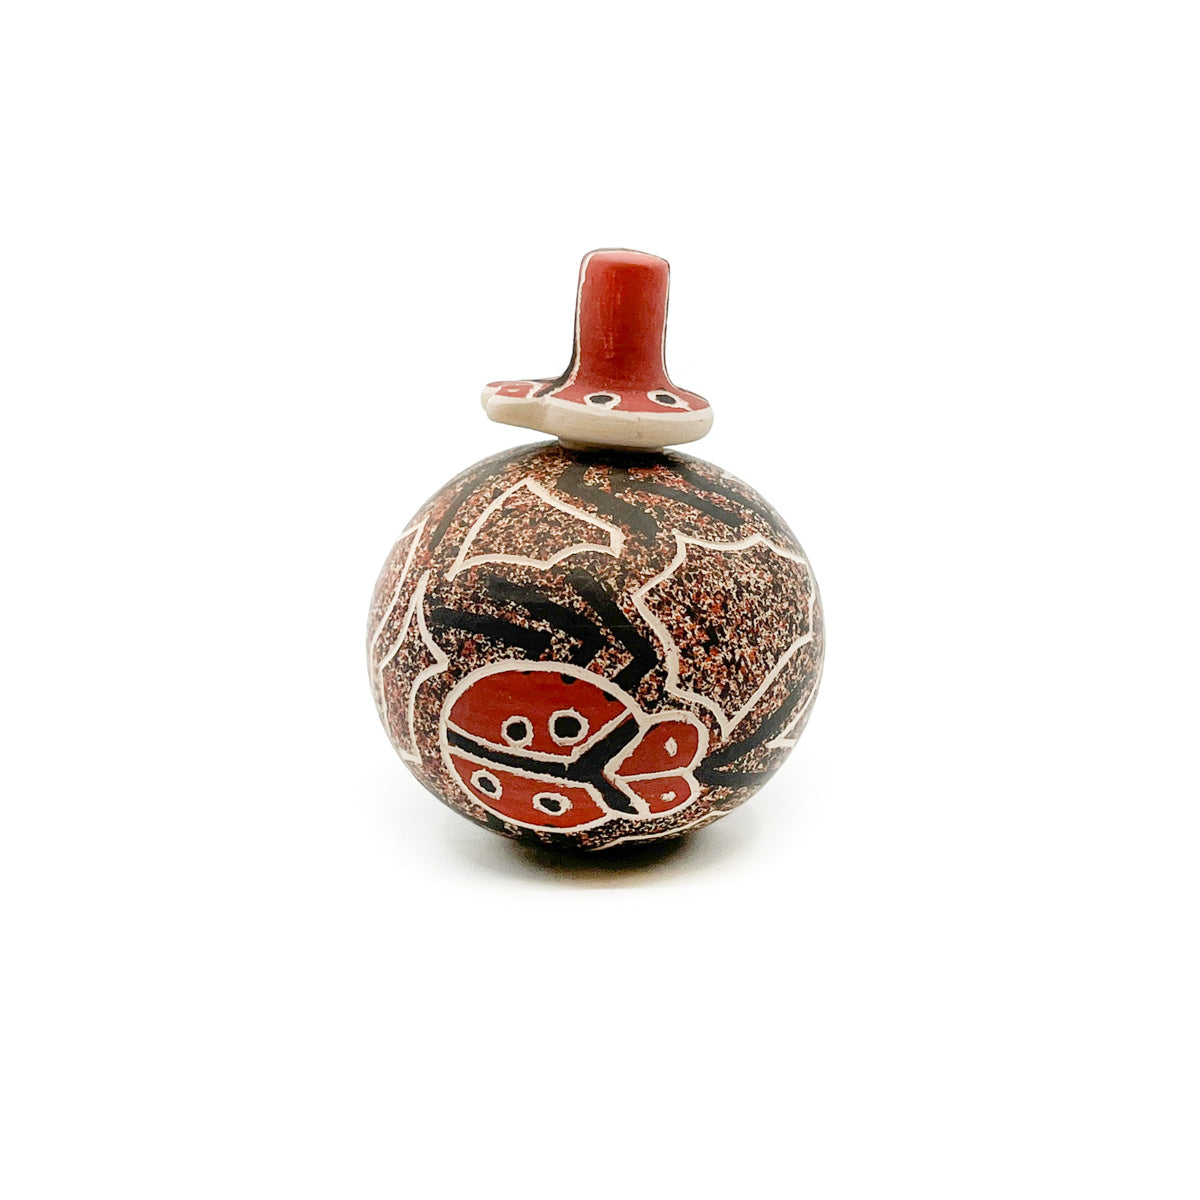 Load image into Gallery viewer, Mini Lidded Seed Pot with Ladybug
